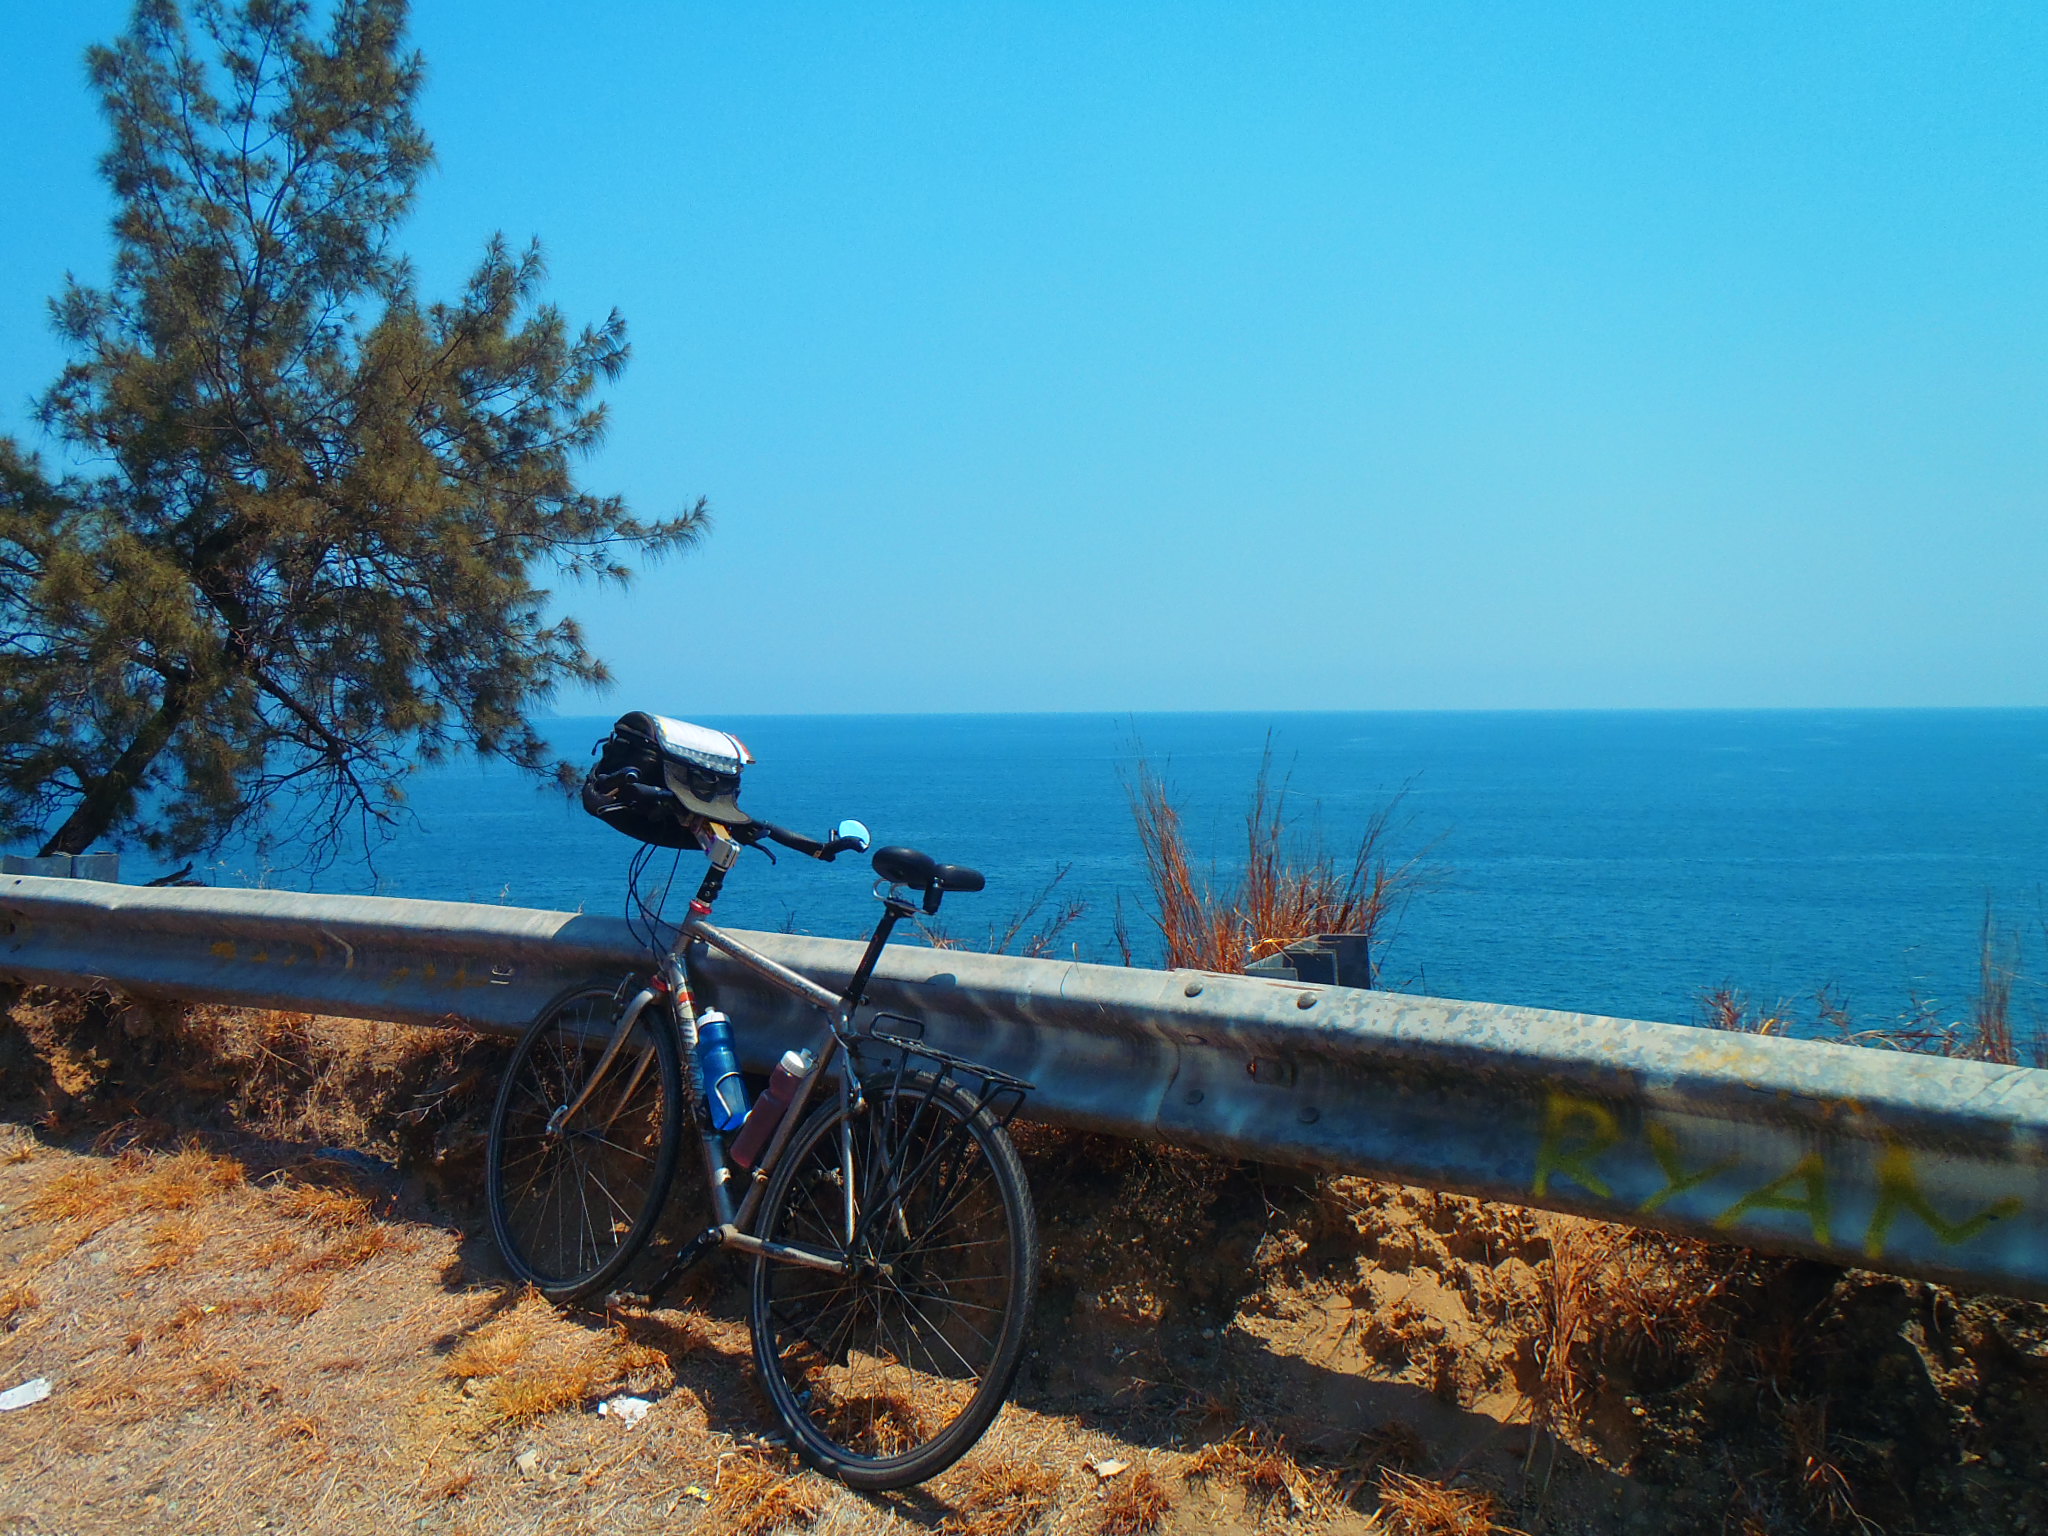 Henry-Tour D'Afrique-Bicycle along guard rail overlooking water